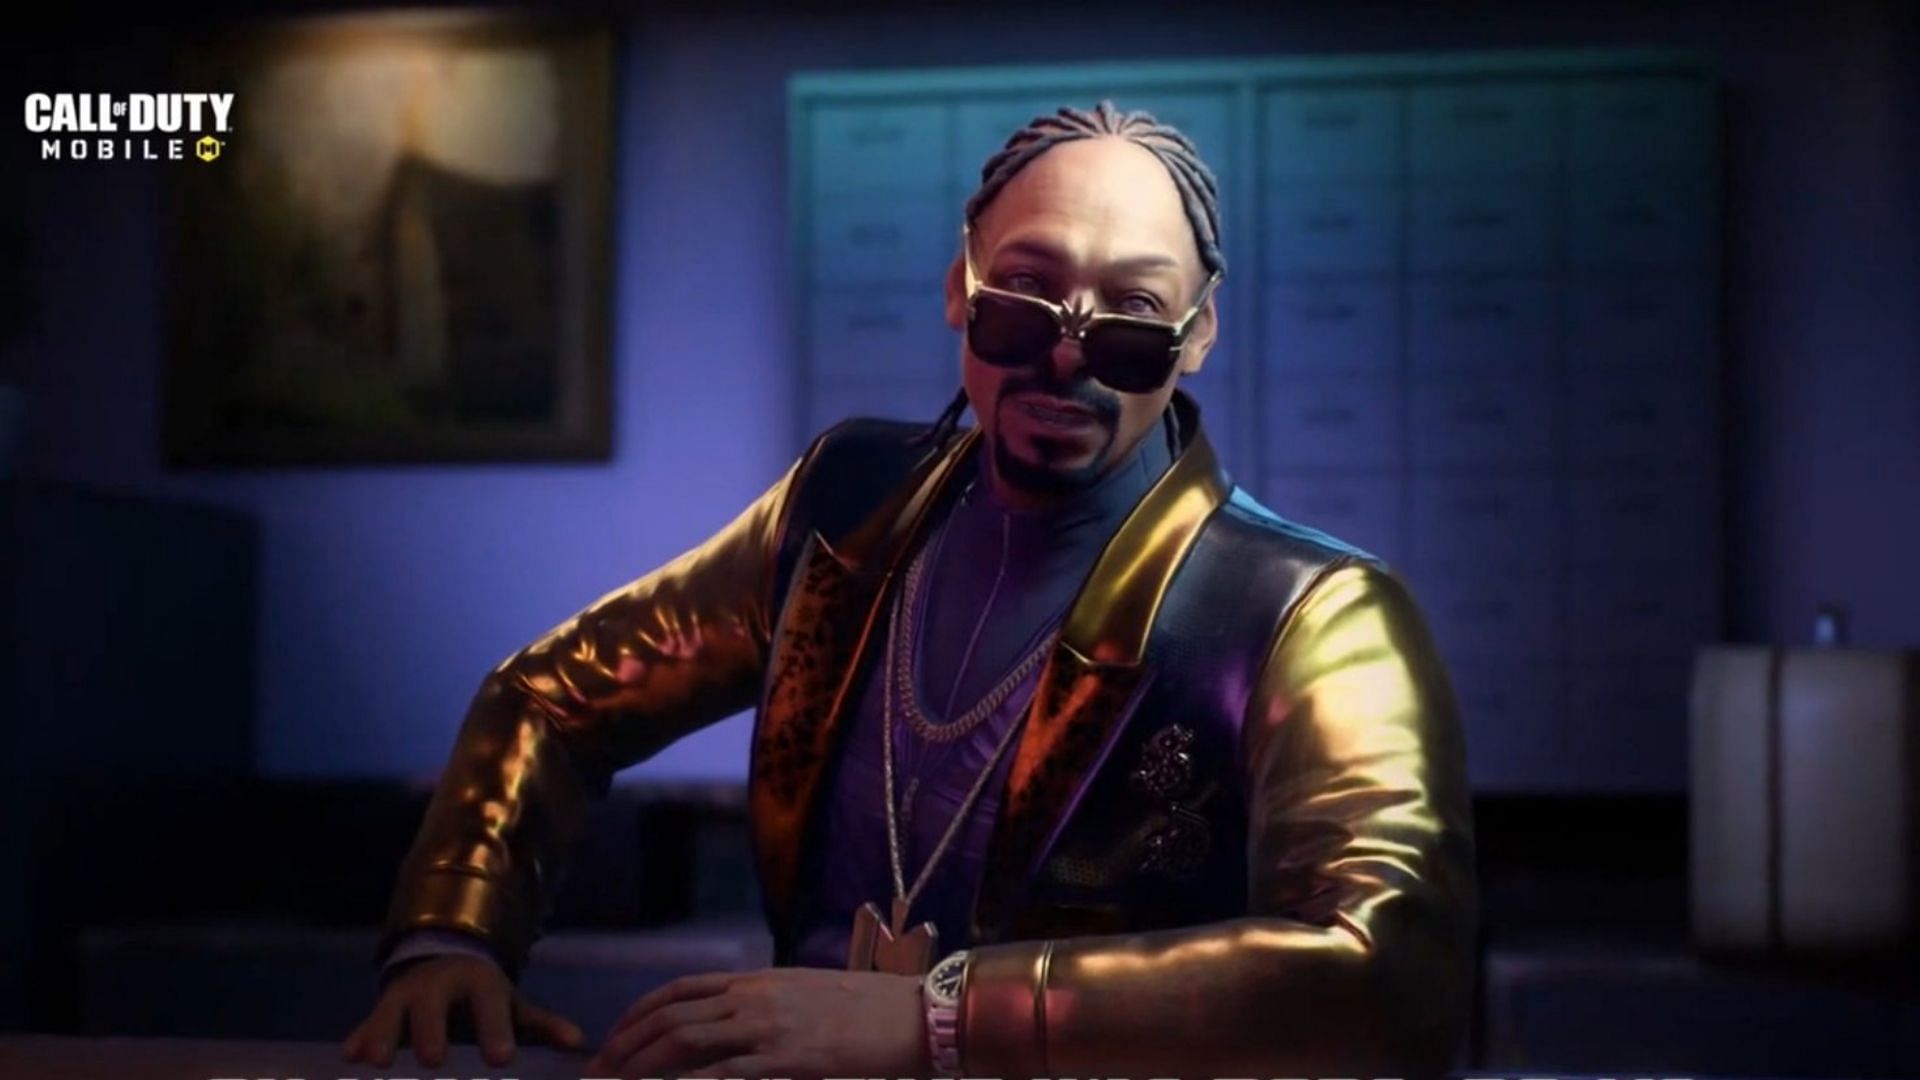 COD Mobile Season 3 will release a Snoop Dogg operator skin and its in-game look has now been leaked (Image via Twitter/ LeakerOnDuty)